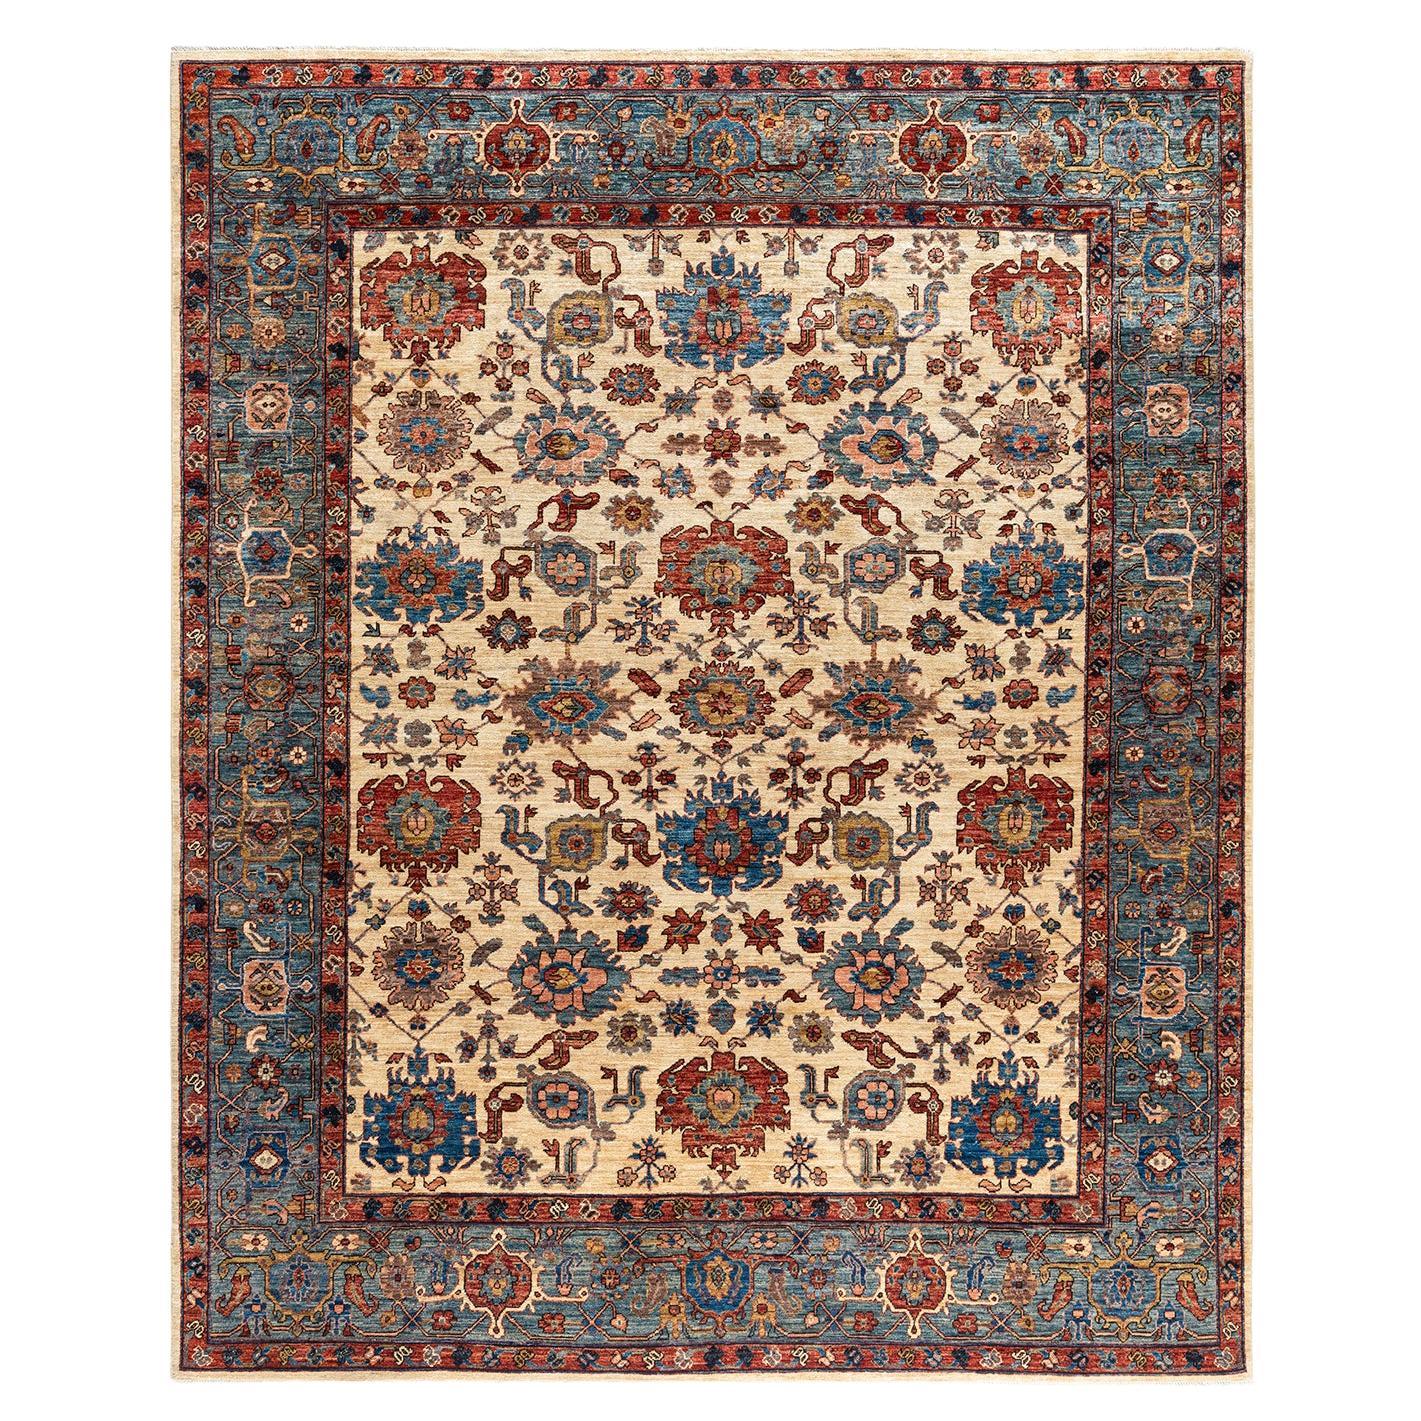 Traditional Serapi Hand Knotted Wool Ivory Area Rug